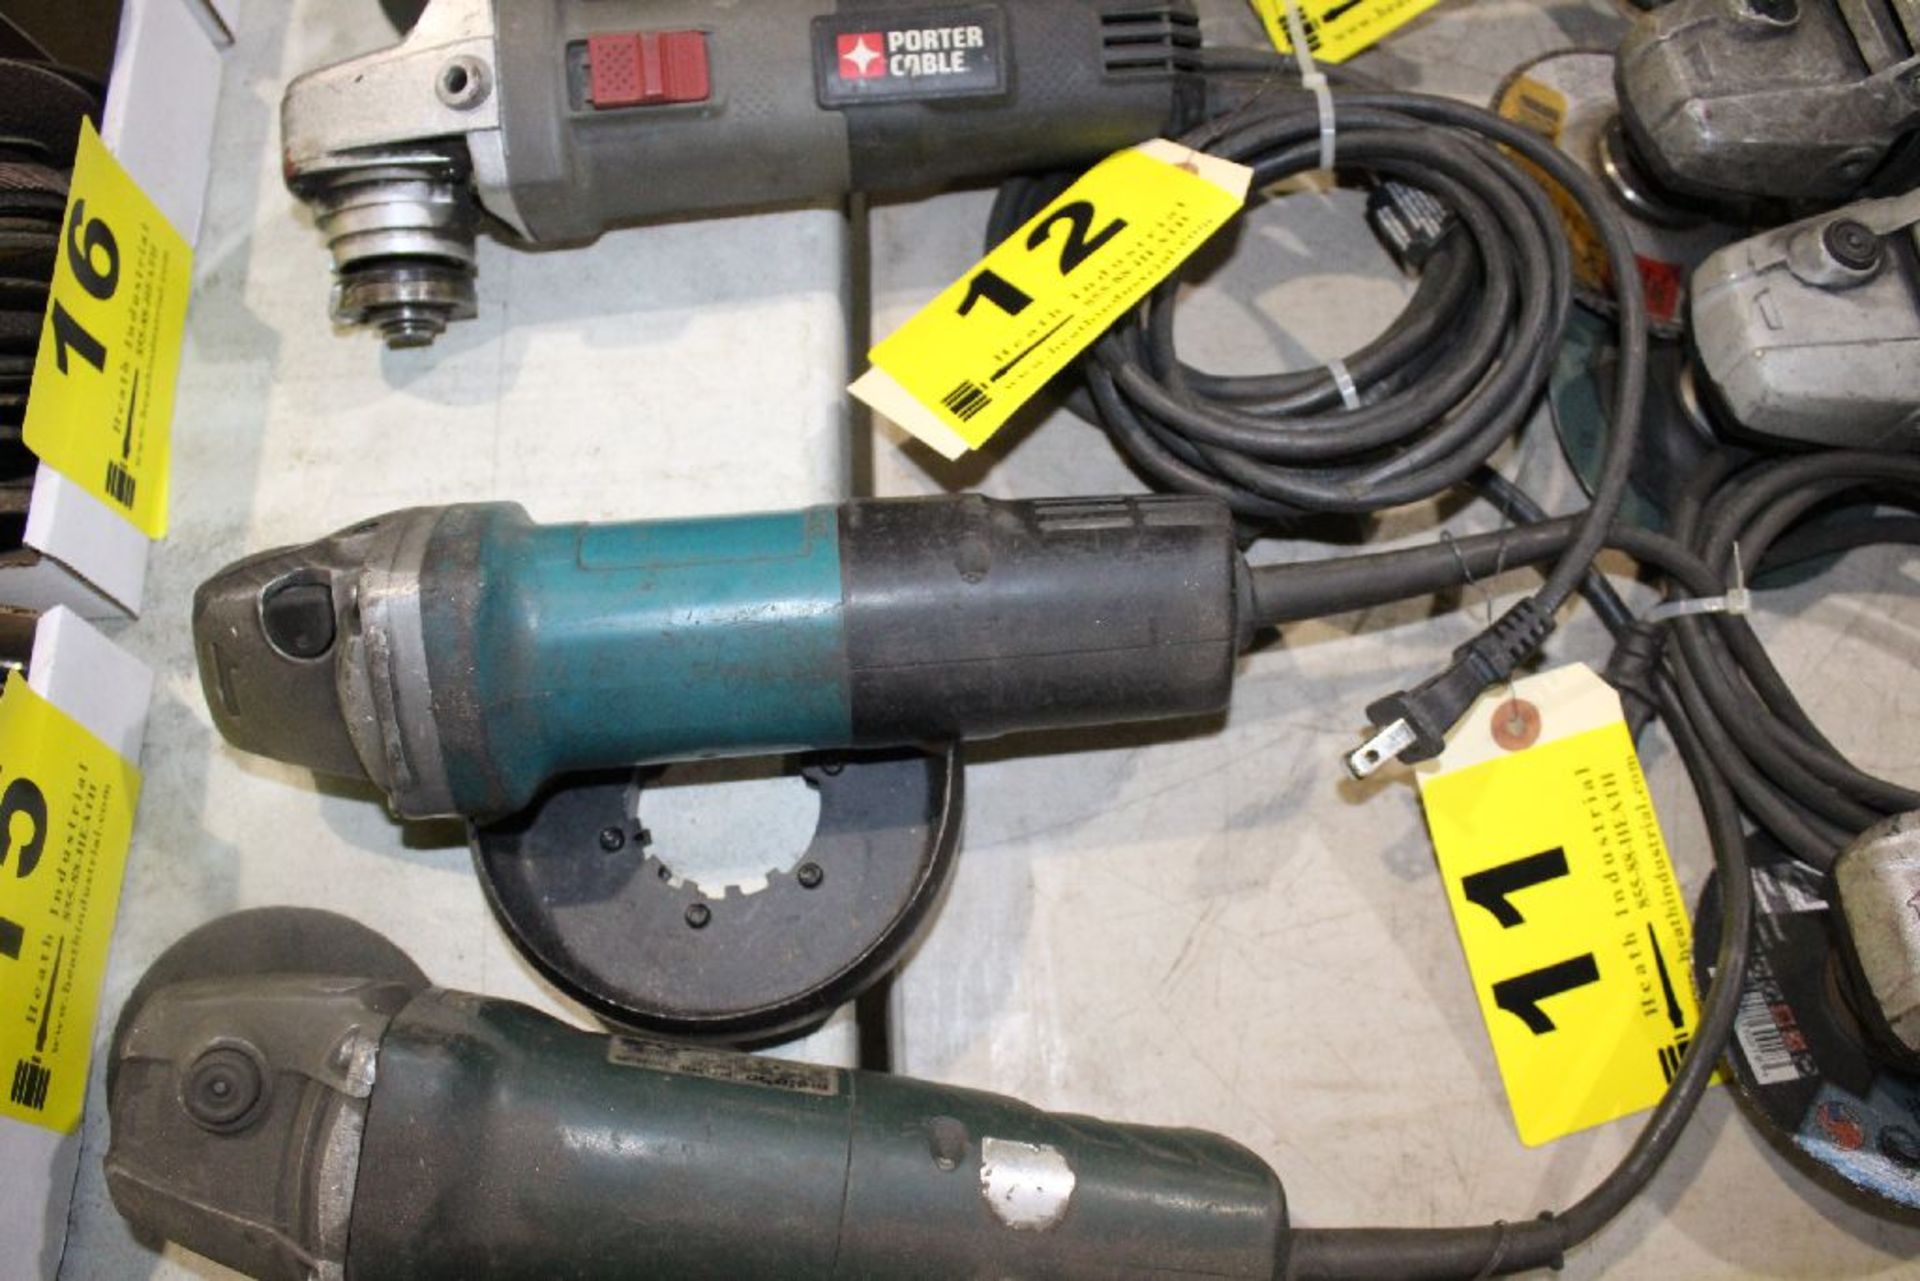 RIGHT ANGLE GRINDER